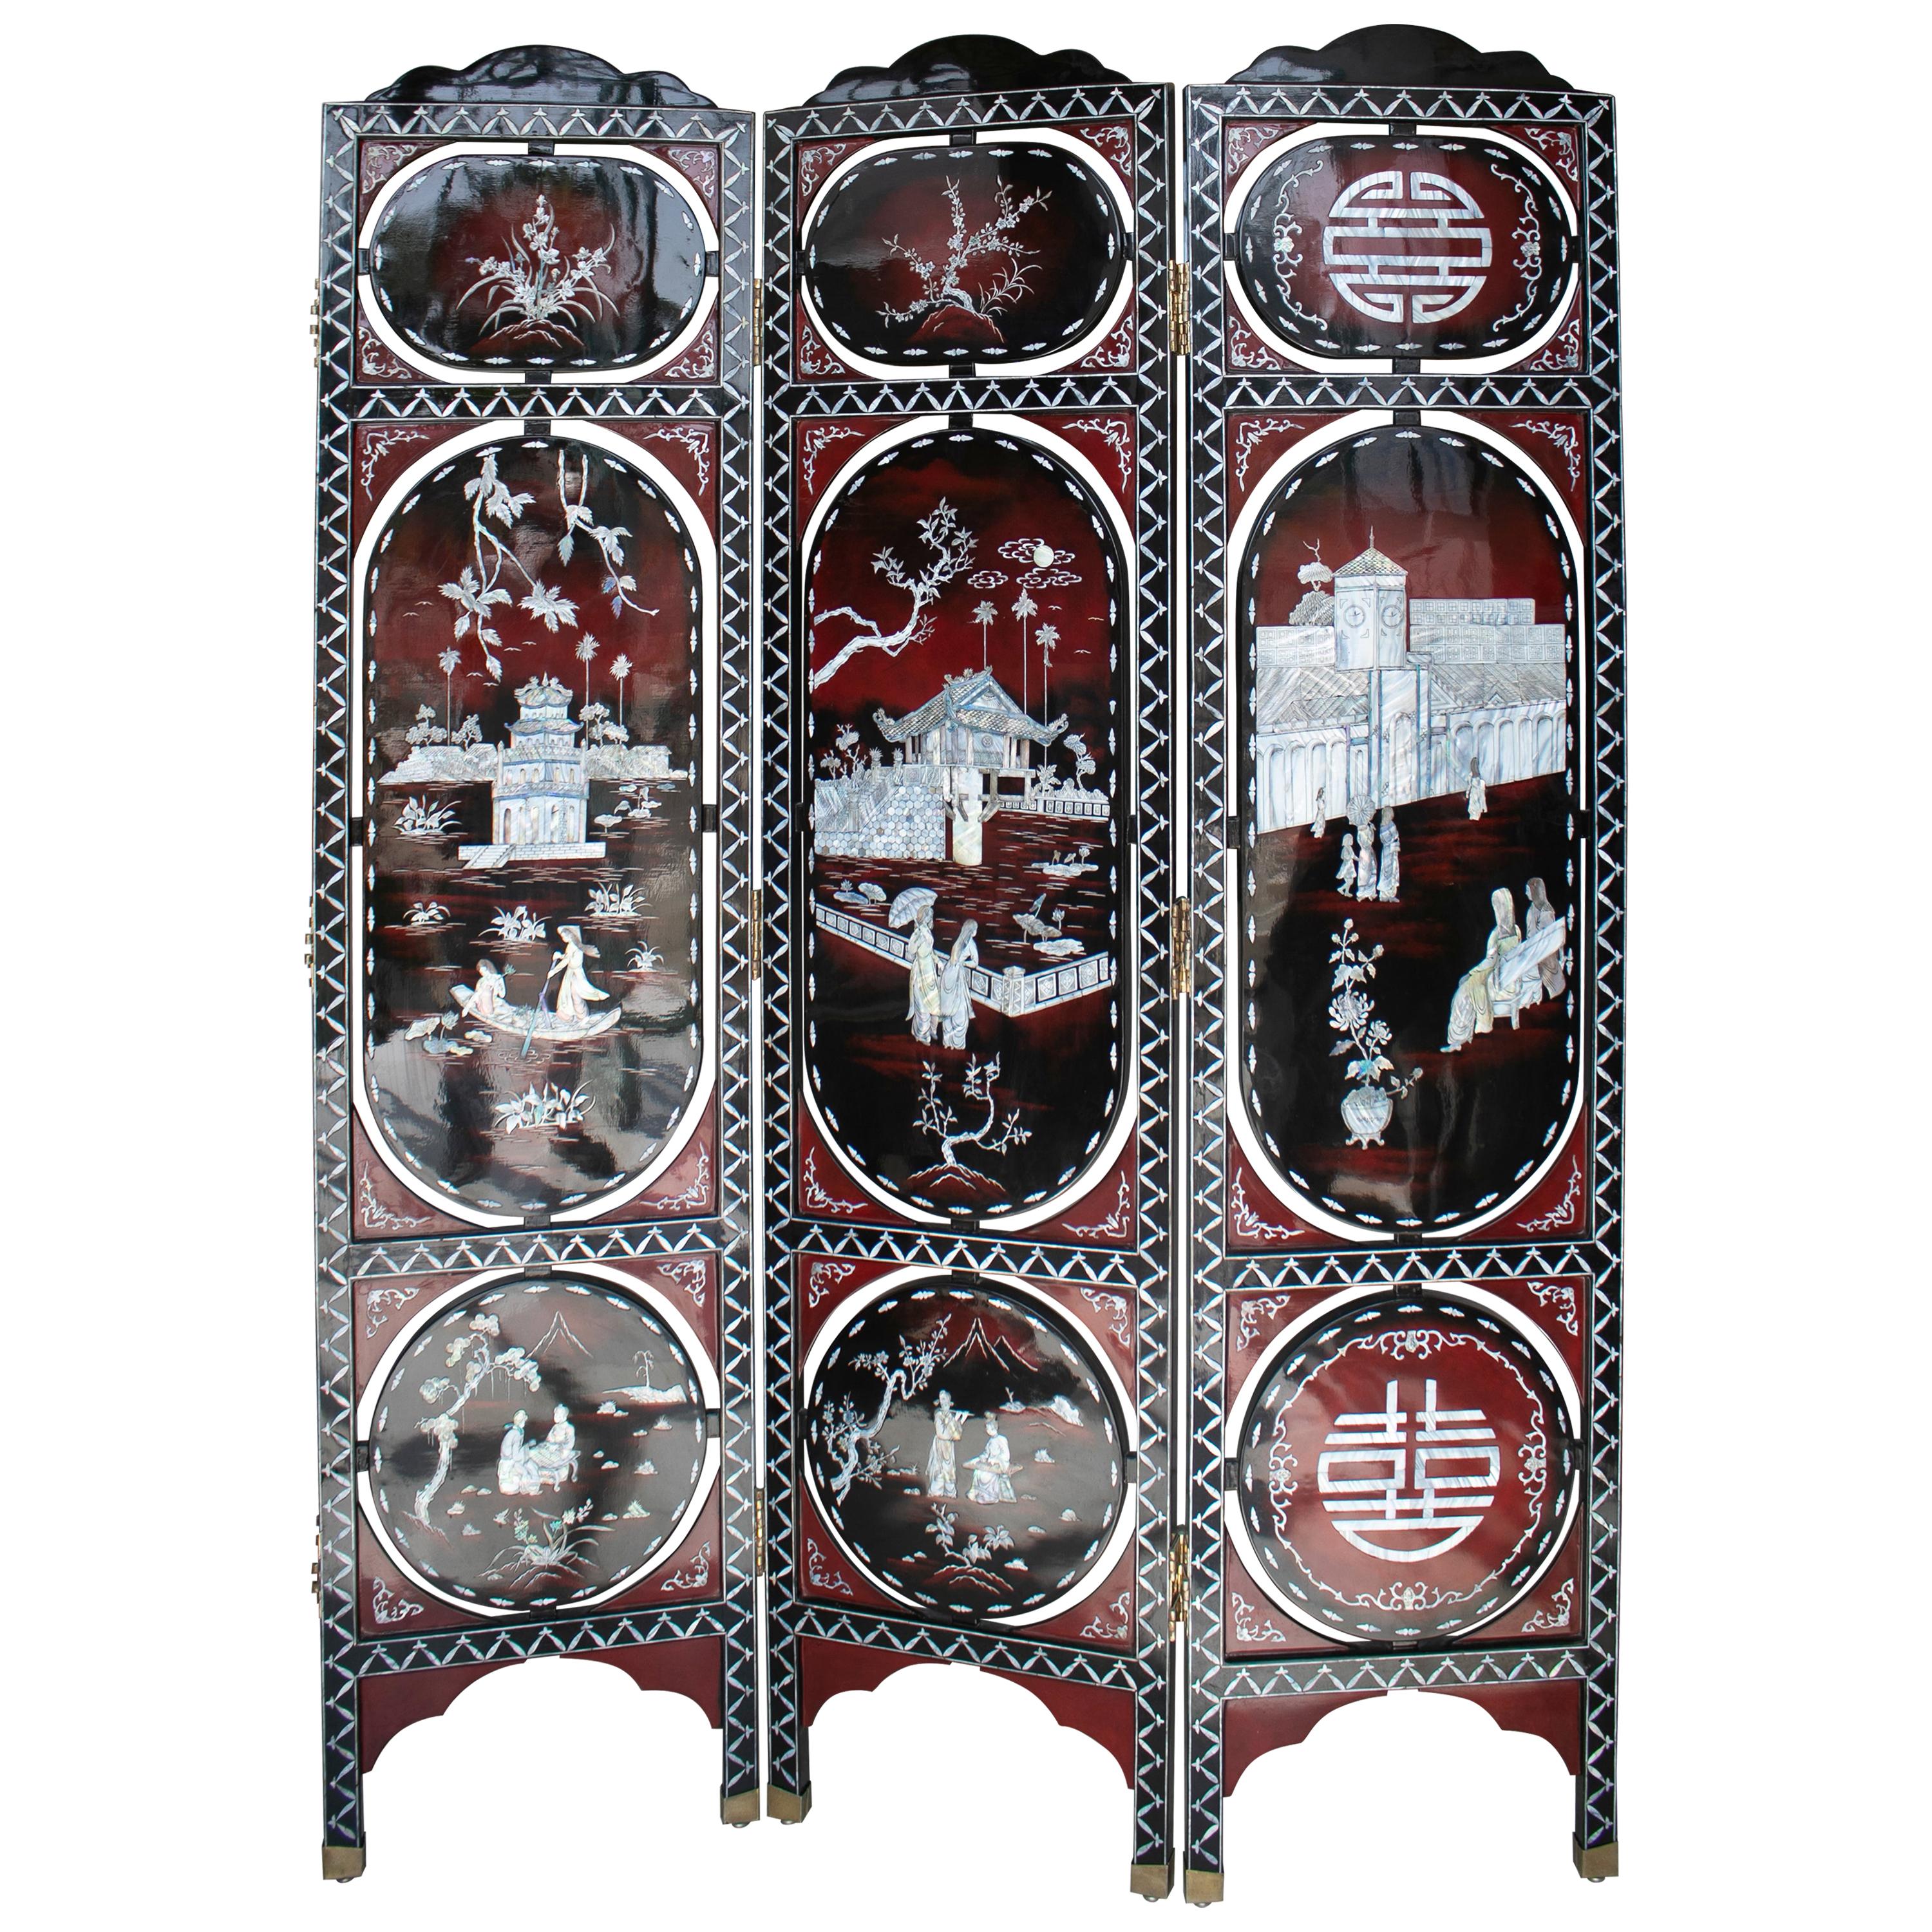 1970s Chinese Lacquered Folding Screen with Nacre Inlay Asian Motifs For Sale